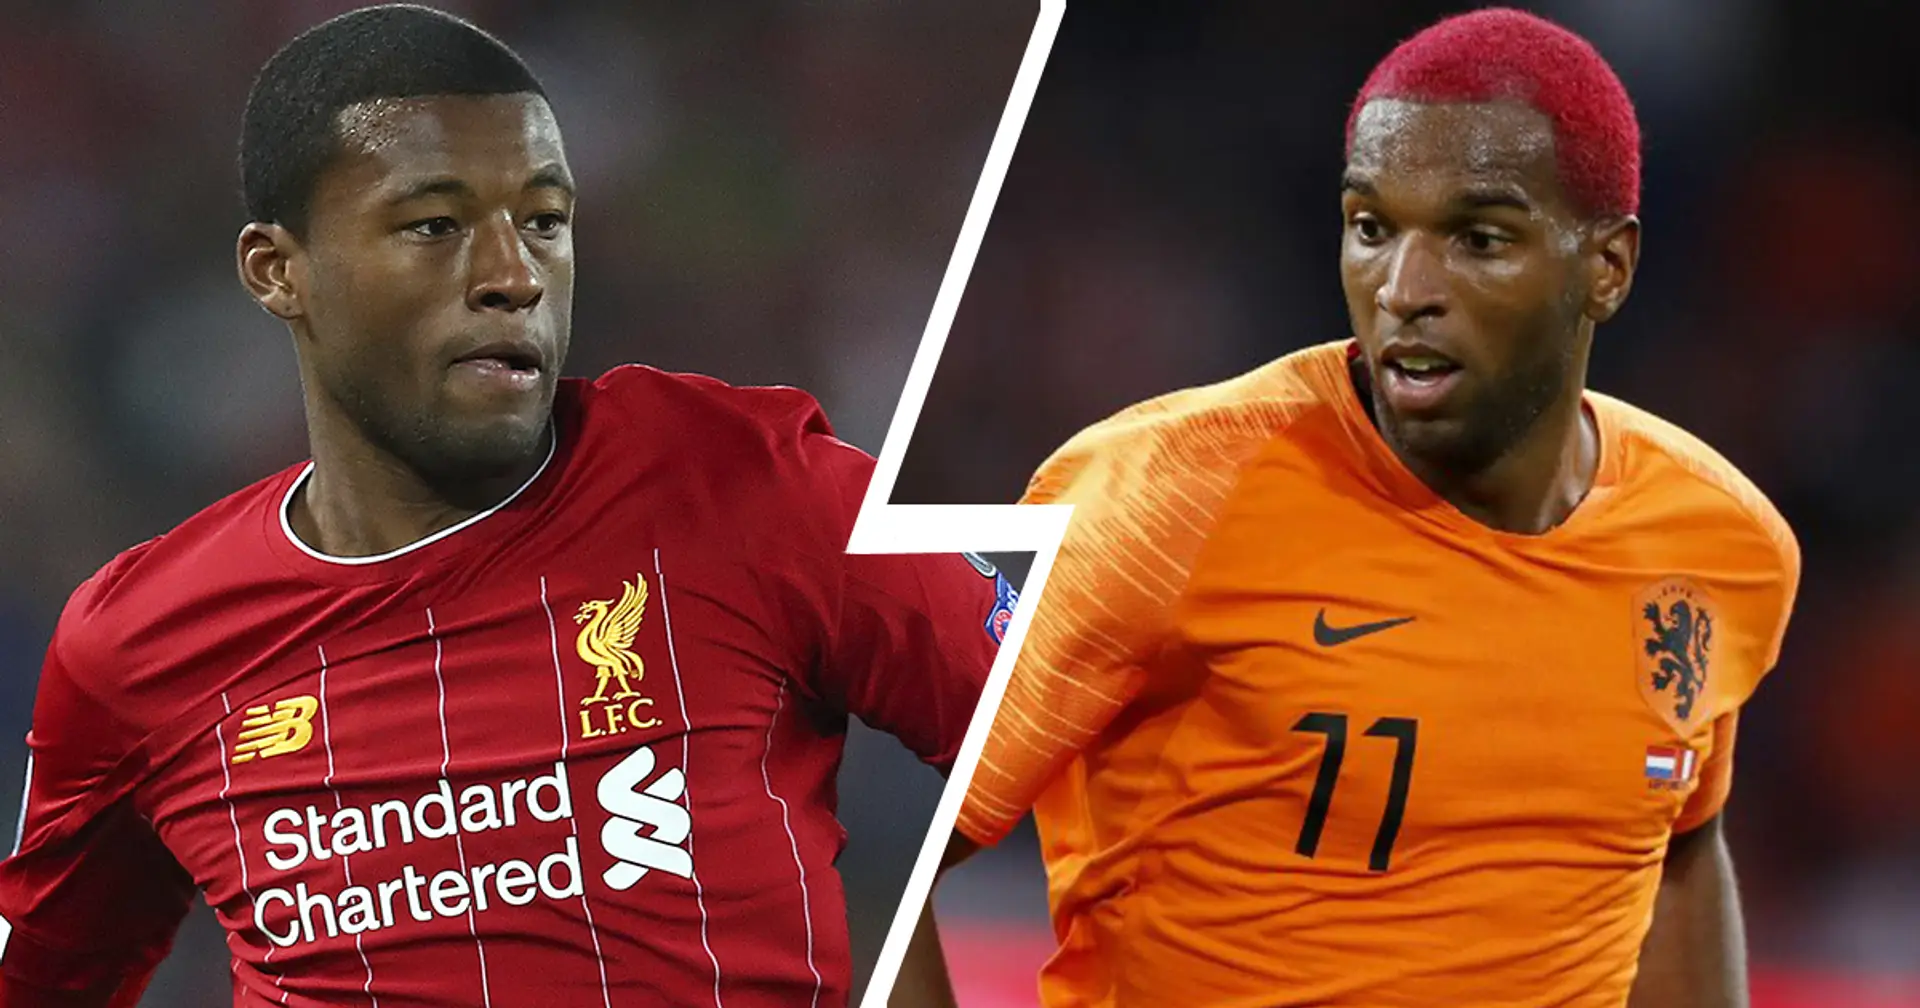 Ryan Babel runs out of words to describe Gini Wijnaldum's brilliance as a player and as a person